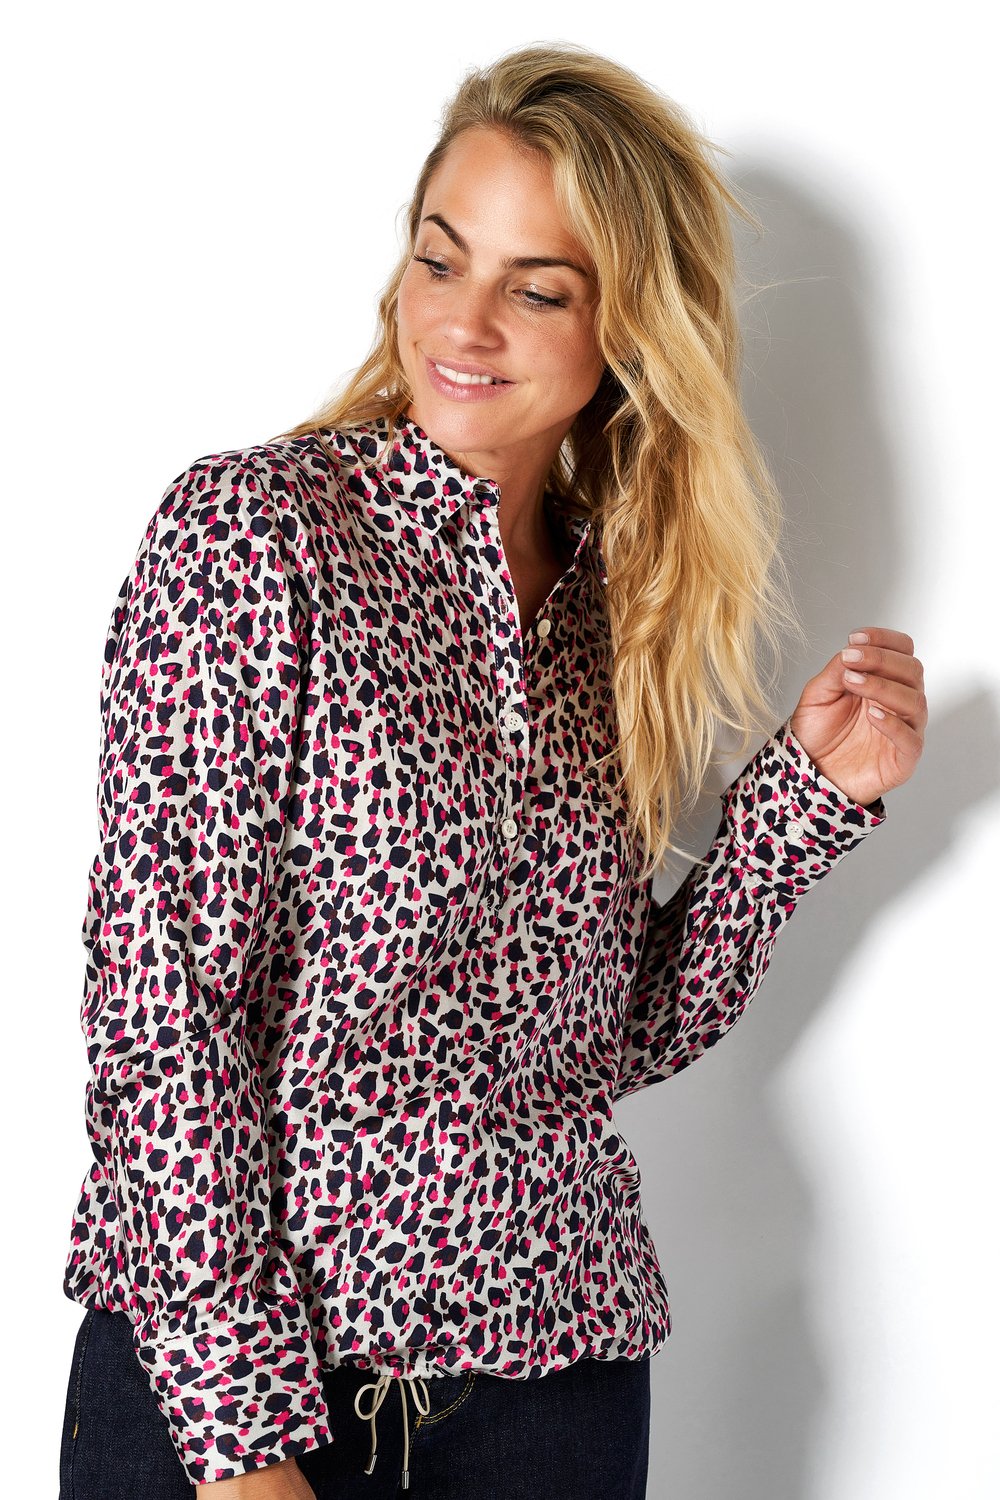 Blouse with animal print | Style »Bianca« pink/beige